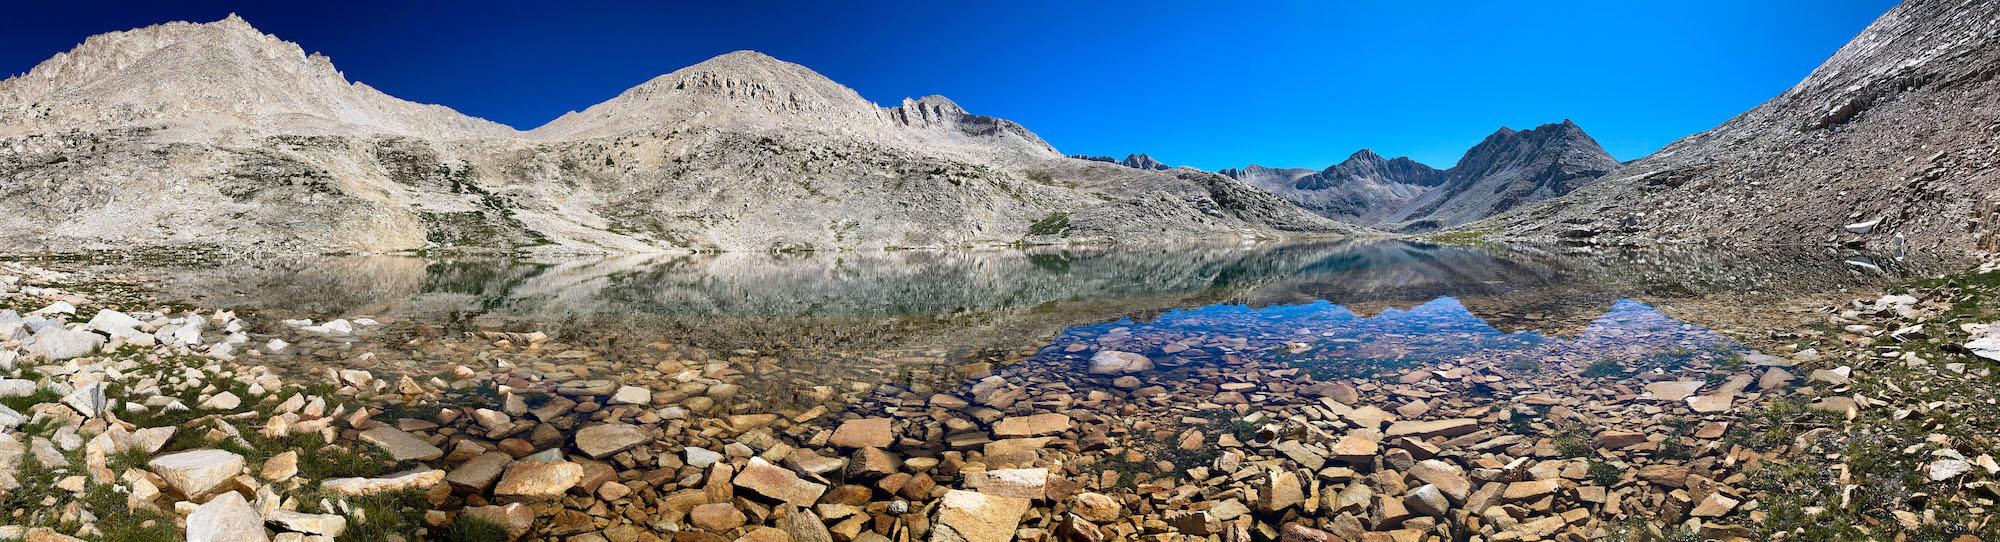 Lake Italy in the Sierras